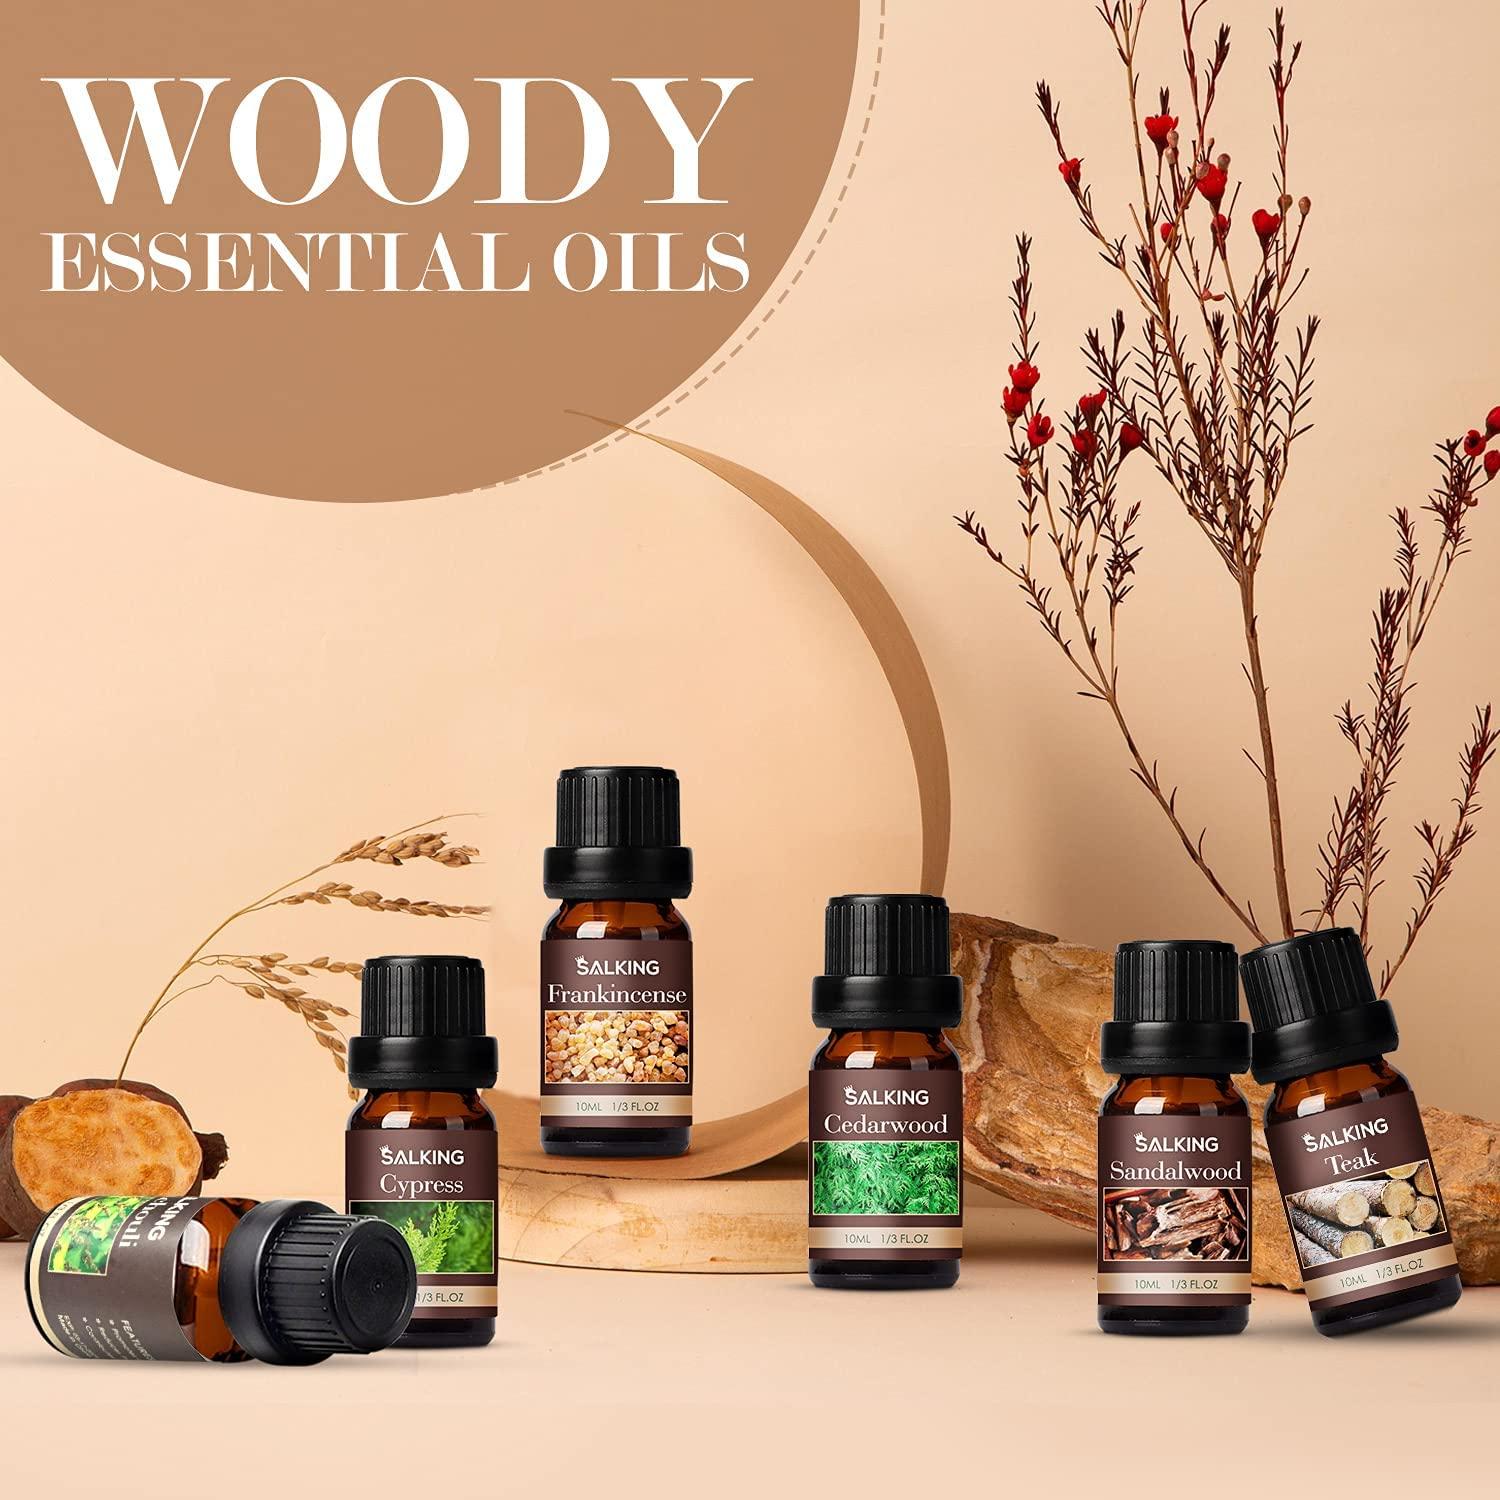 Good Essential – Professional Teakwood Fragrance Oil 30ml for Diffuser,  Candles, Soaps, Lotions, Perfume 1 fl oz